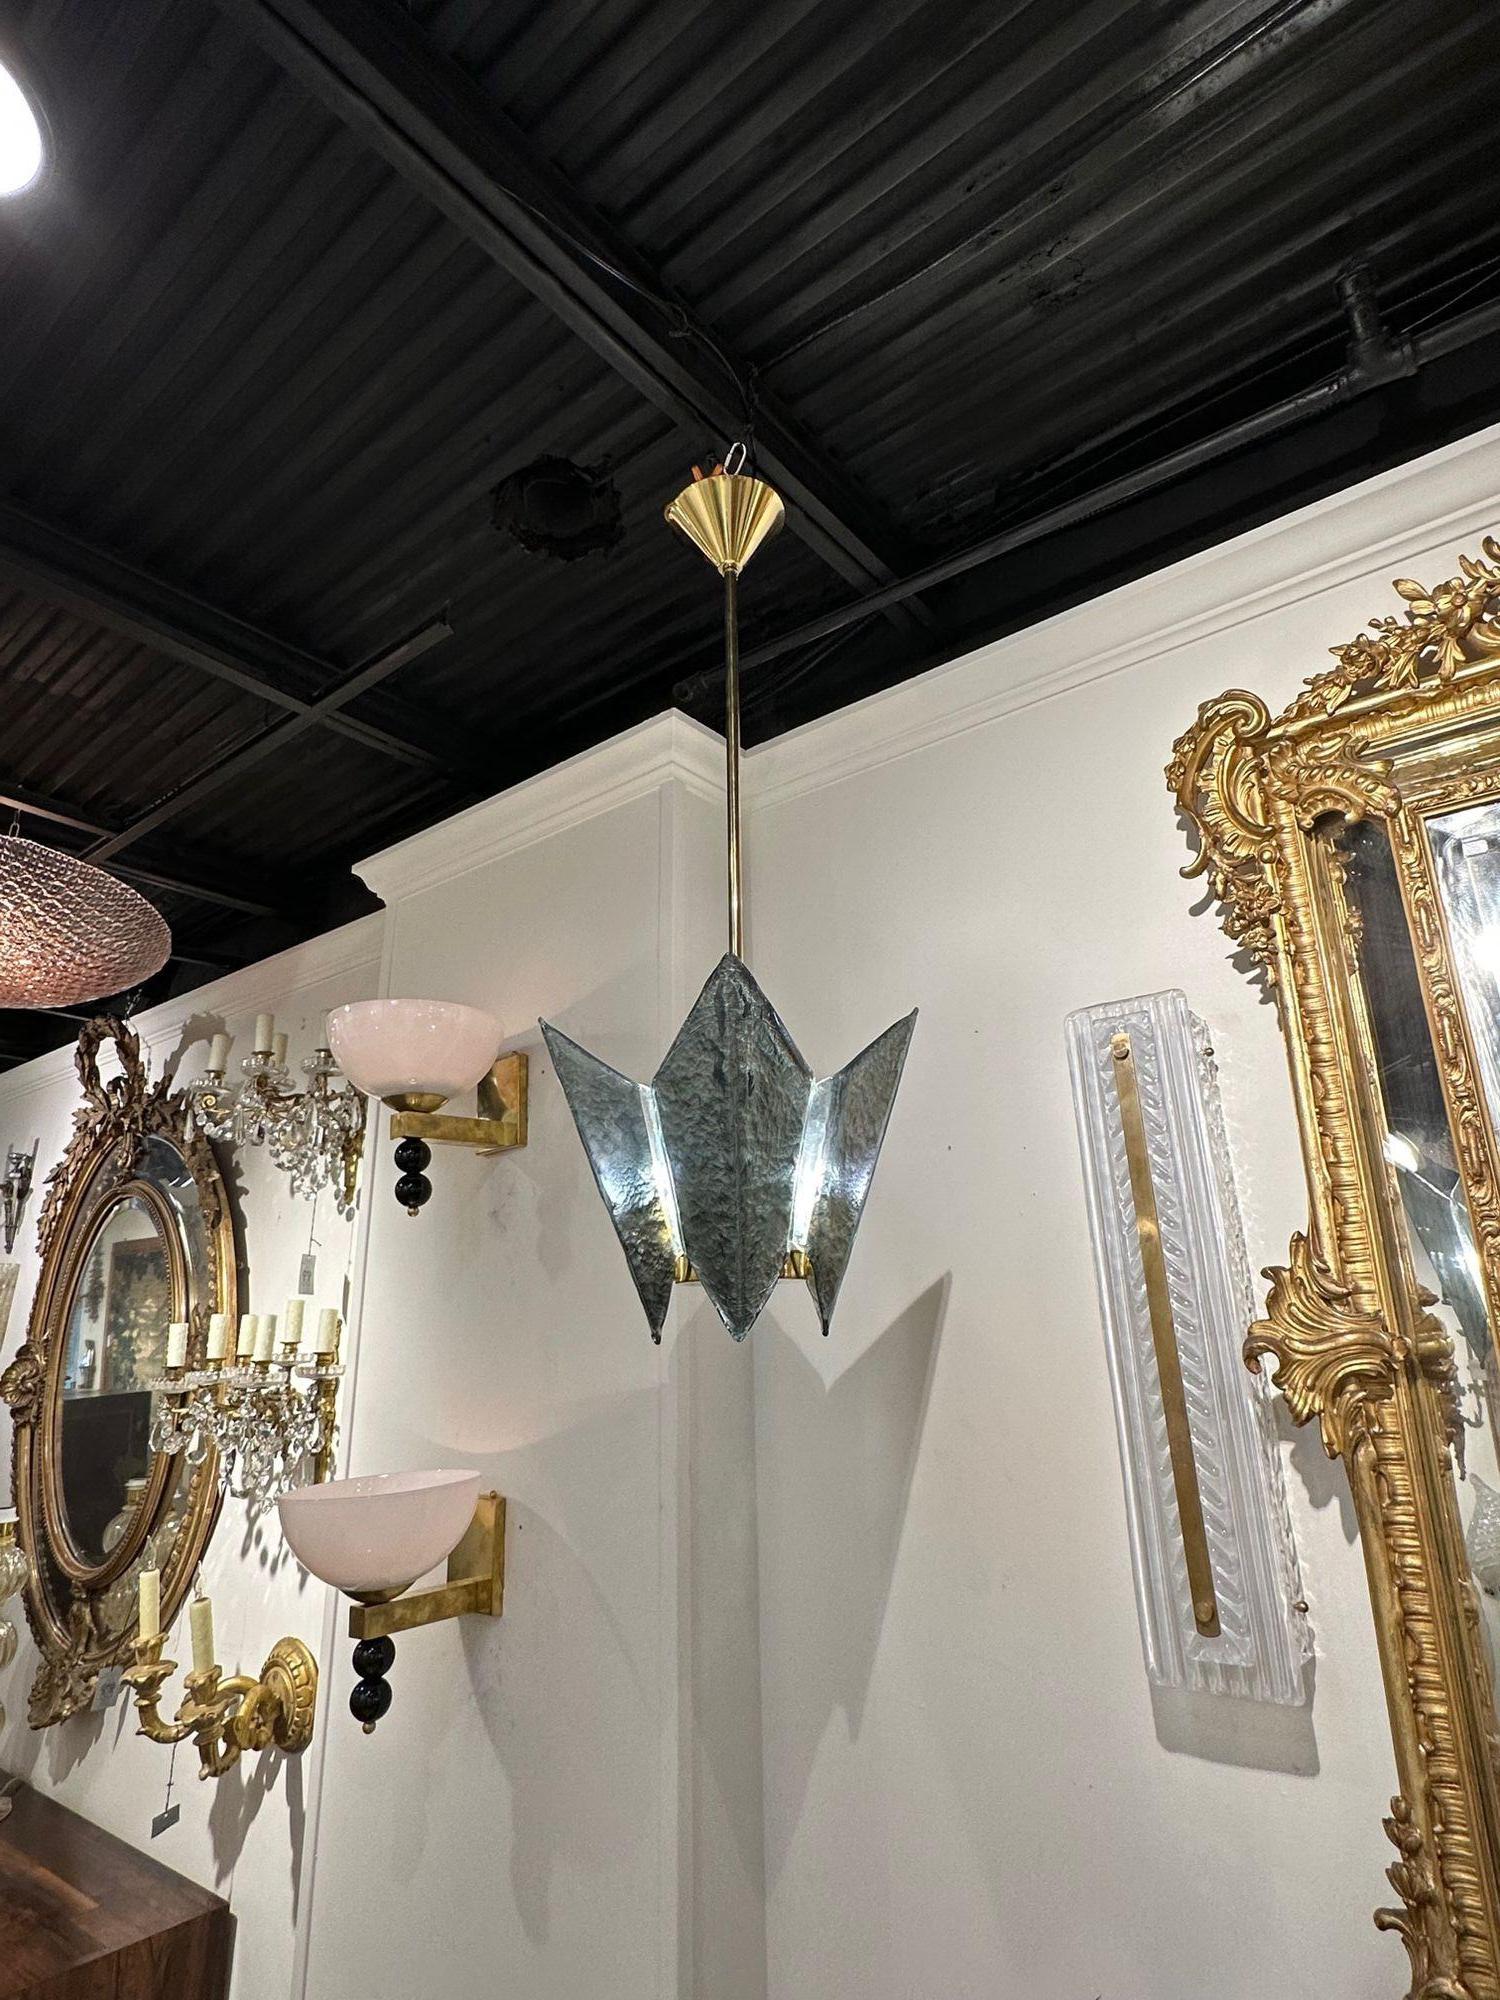 Modern Murano glass and brass pendant light in Fontana green. circa 2000. The chandelier has been professionally re-wired, cleaned and is ready to hang. Includes matching chain and canopy.